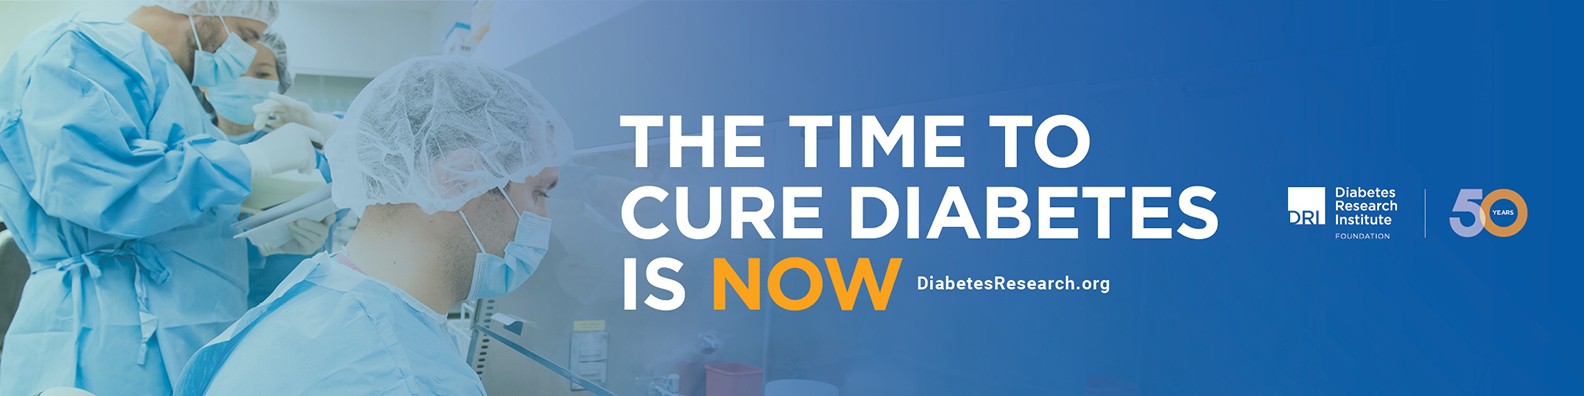 diabetes research and wellness foundation inc)